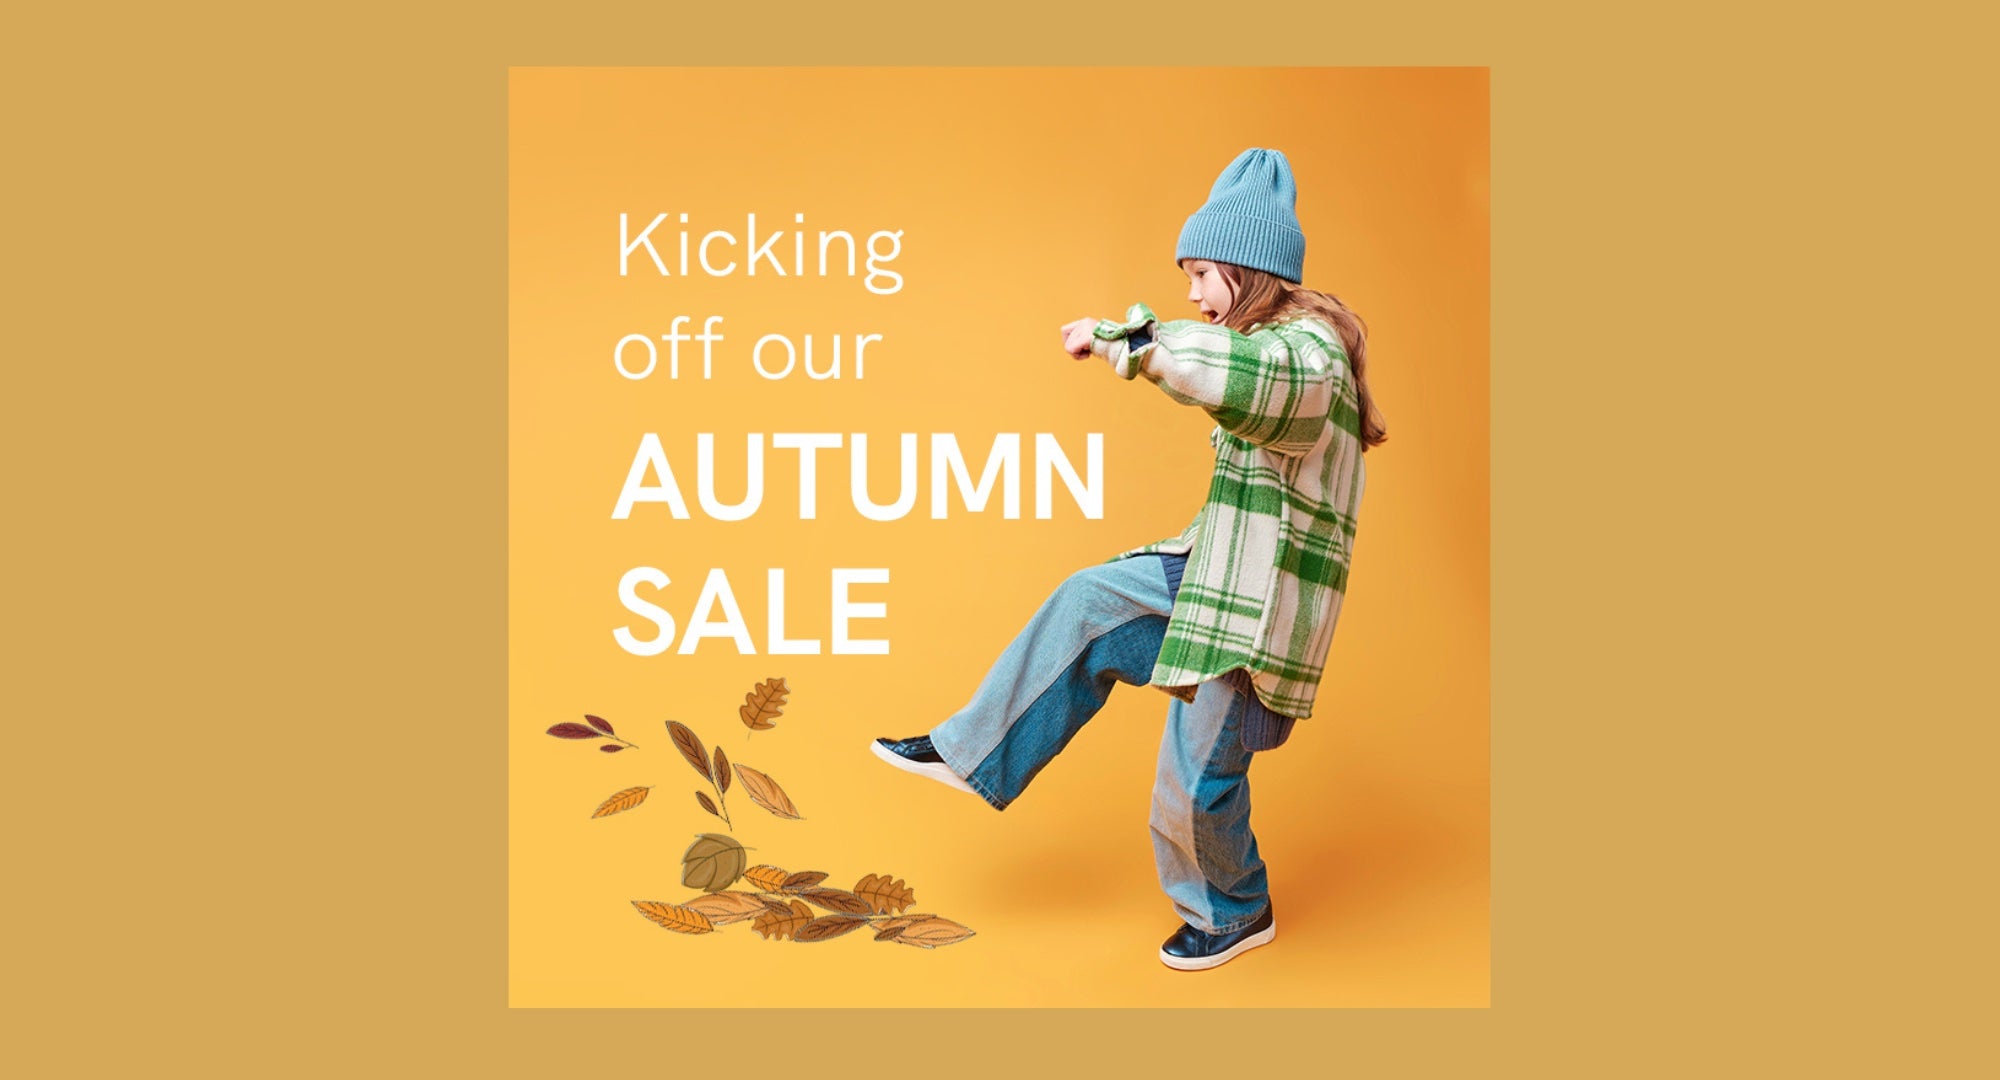 There's an autumn sale going on right now with up to 80% off on kids interiors! If you're looking to spruce up your child's room or create a cosy space for them to relax in, now is the perfect time to do it. Don't miss out on these amazing deals! 